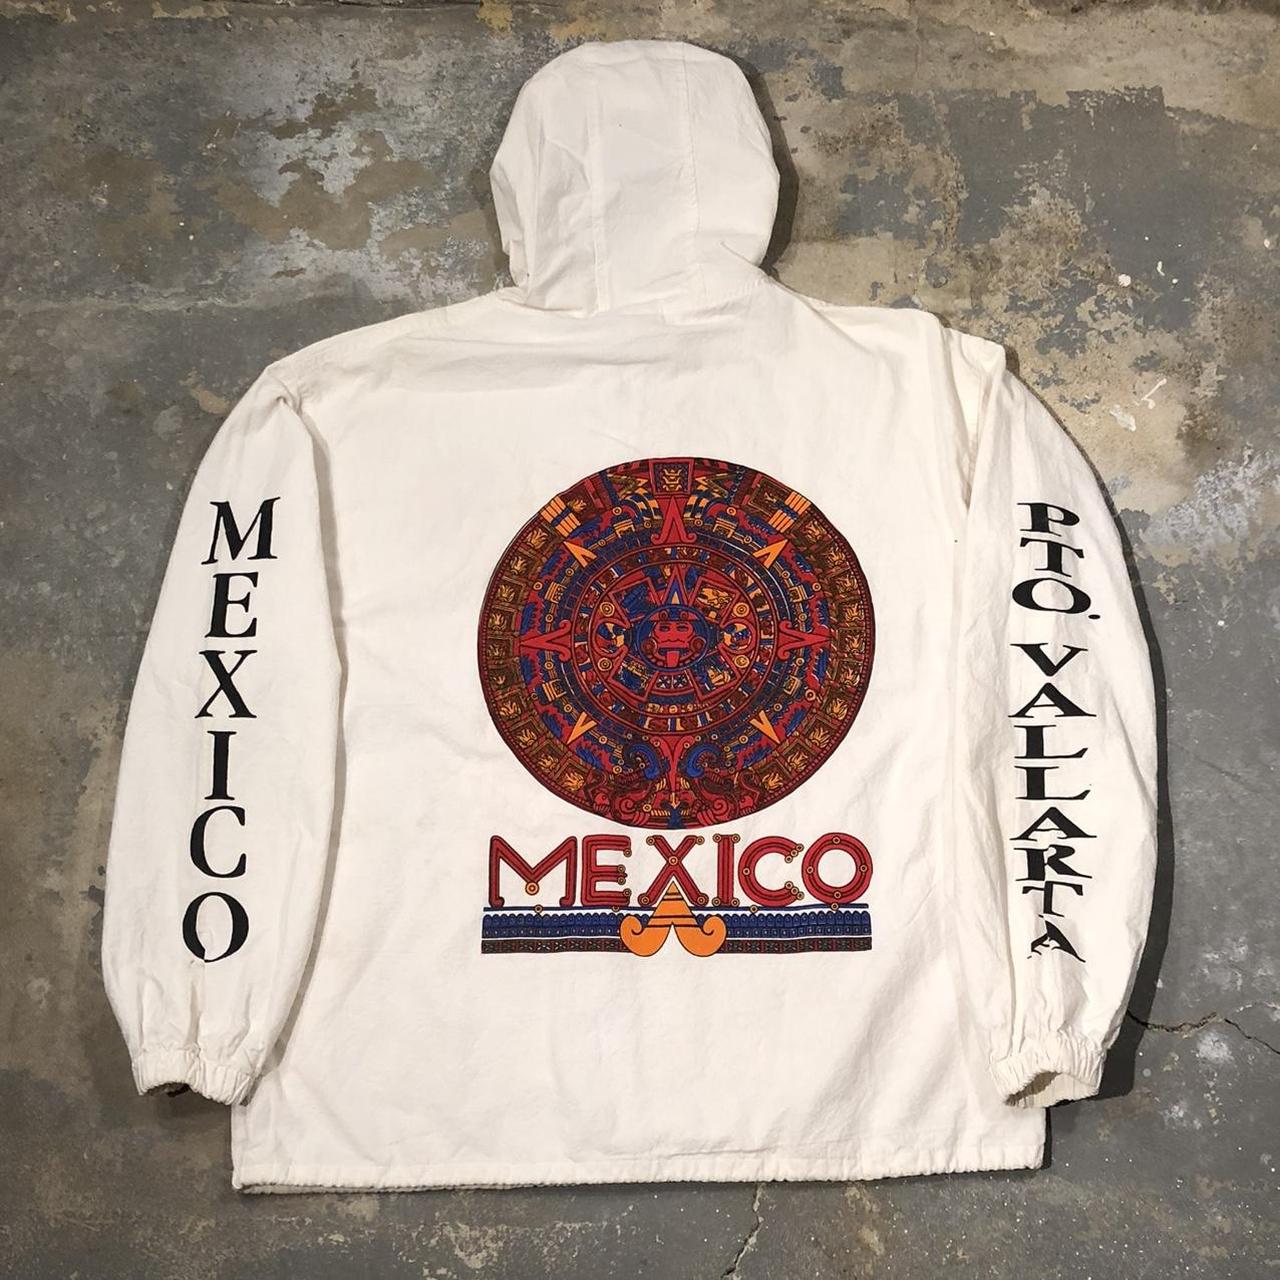 Product Image 1 - Vintage Mexico Hoodie 🇲🇽

•Size M
•In